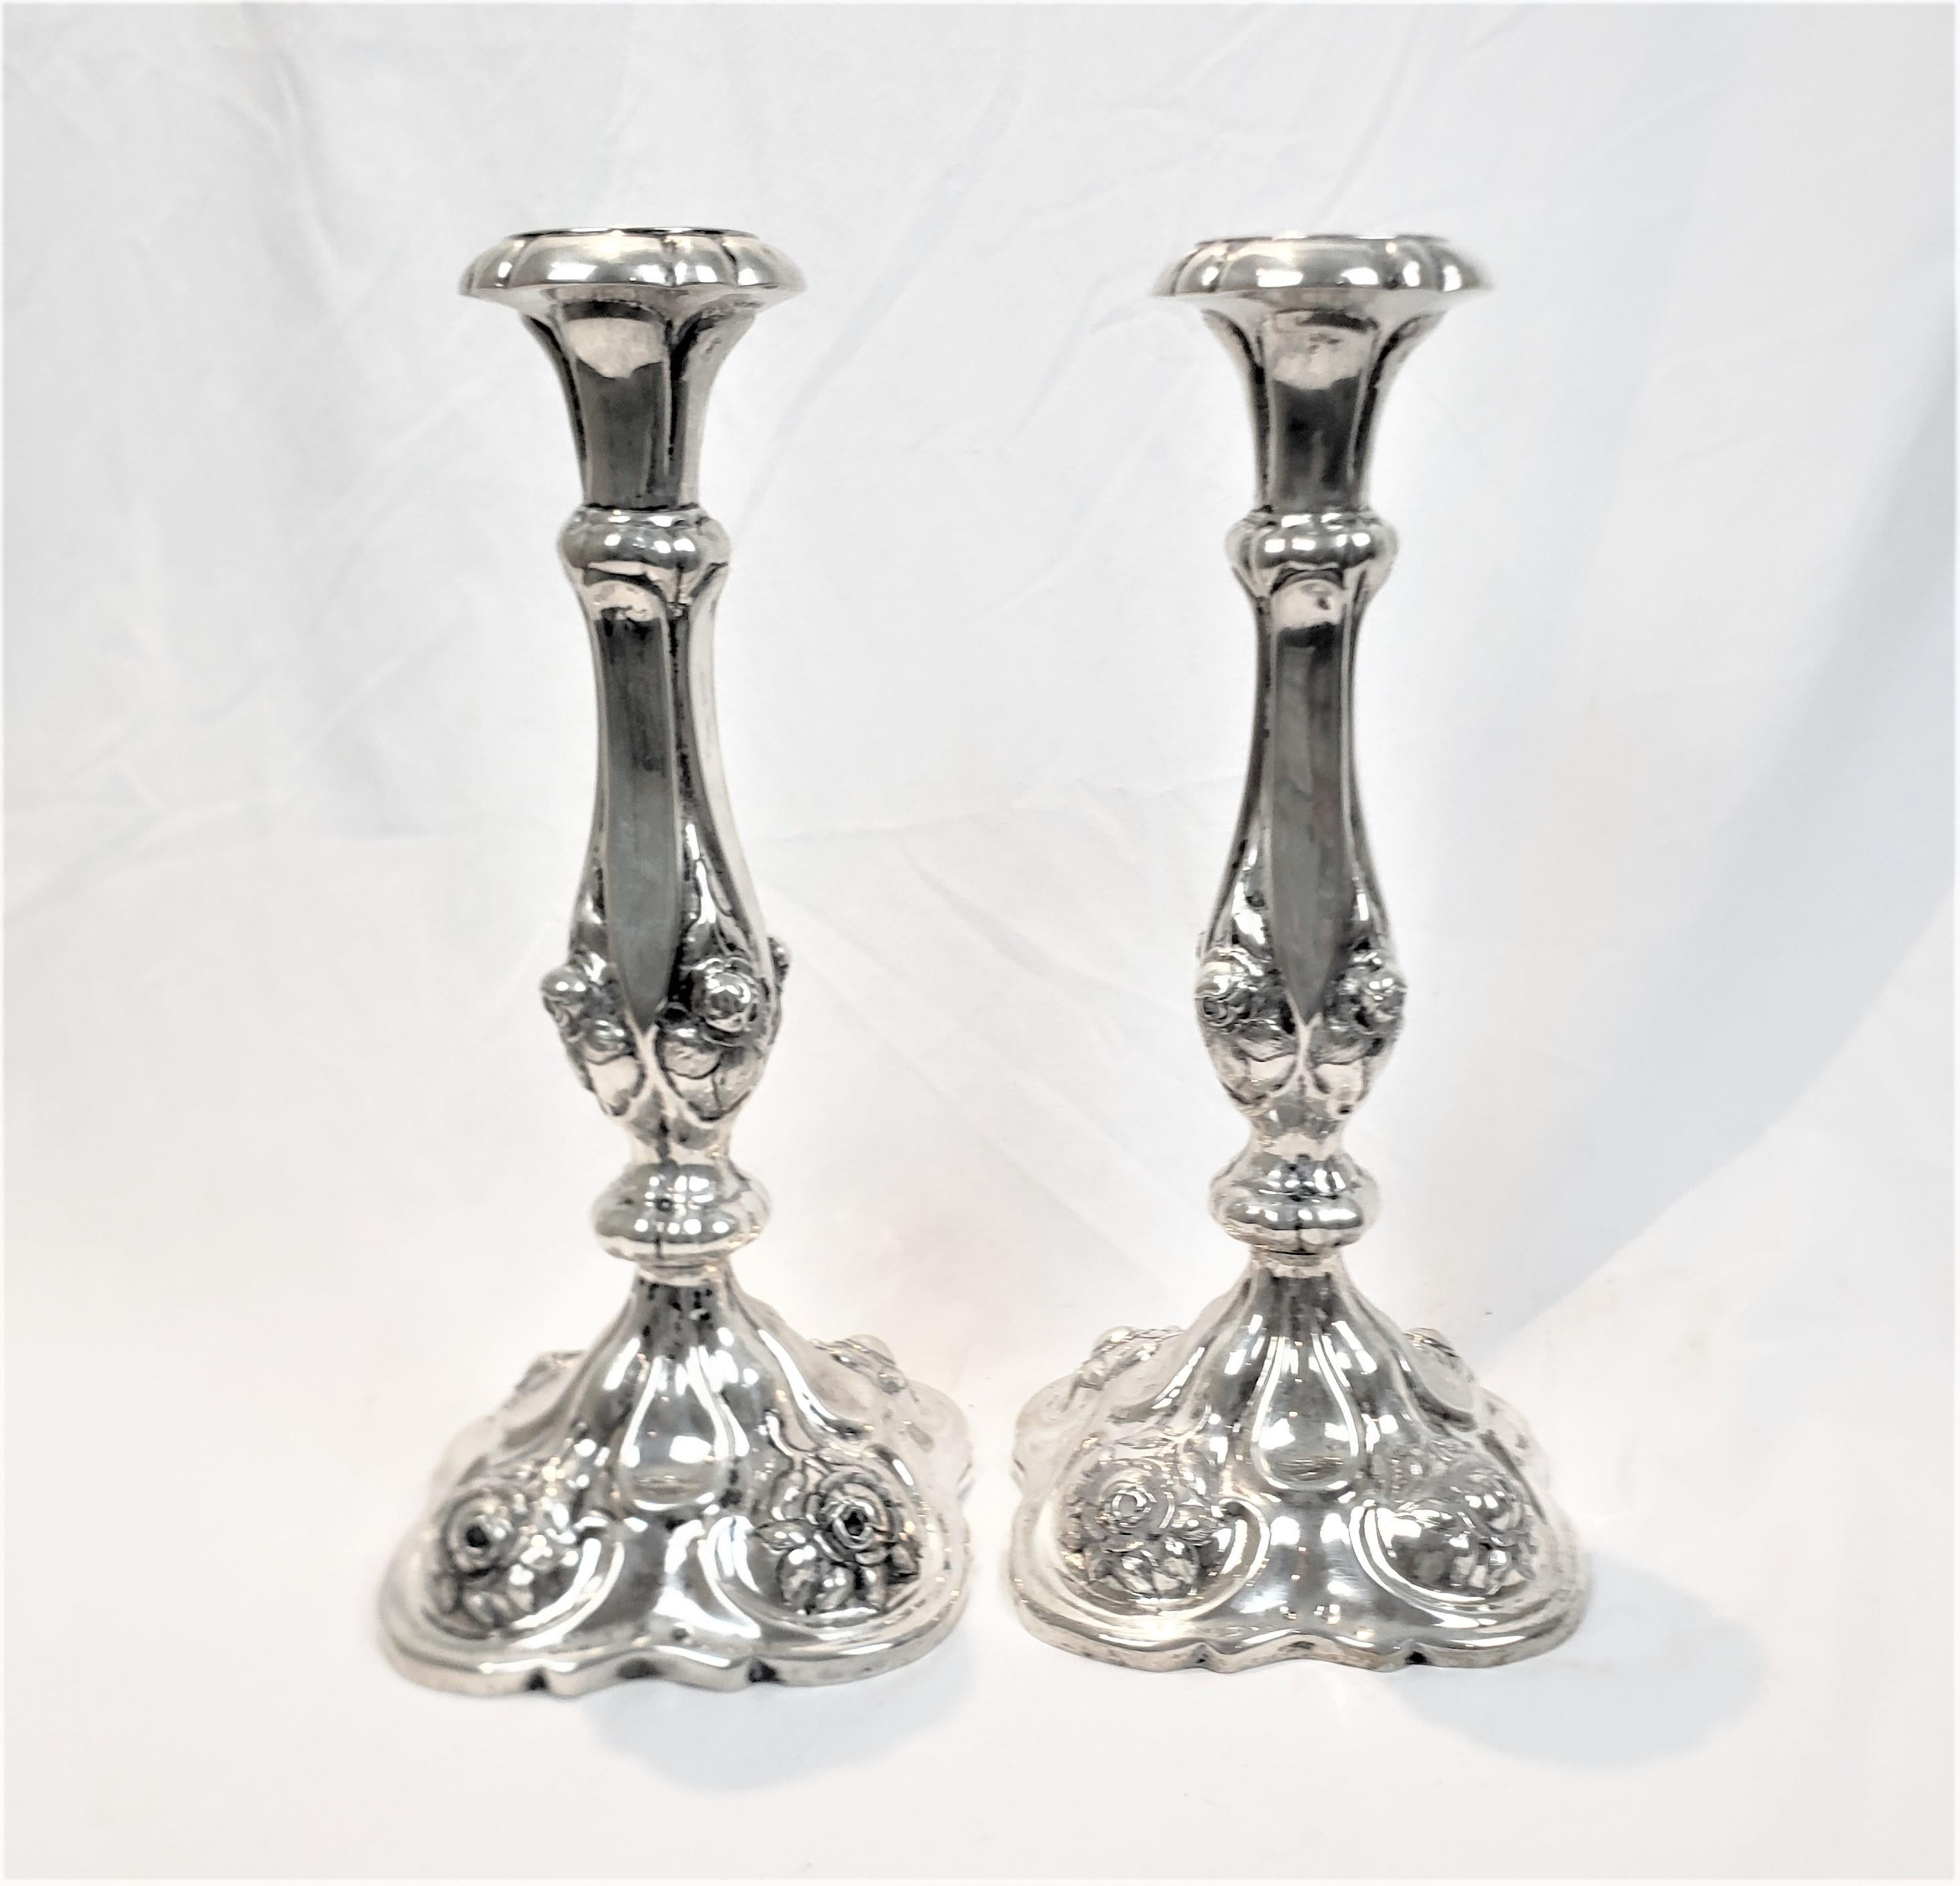 Pair of Antique Austro-Hungarian Silver Candlesticks with Chased Flowers For Sale 2